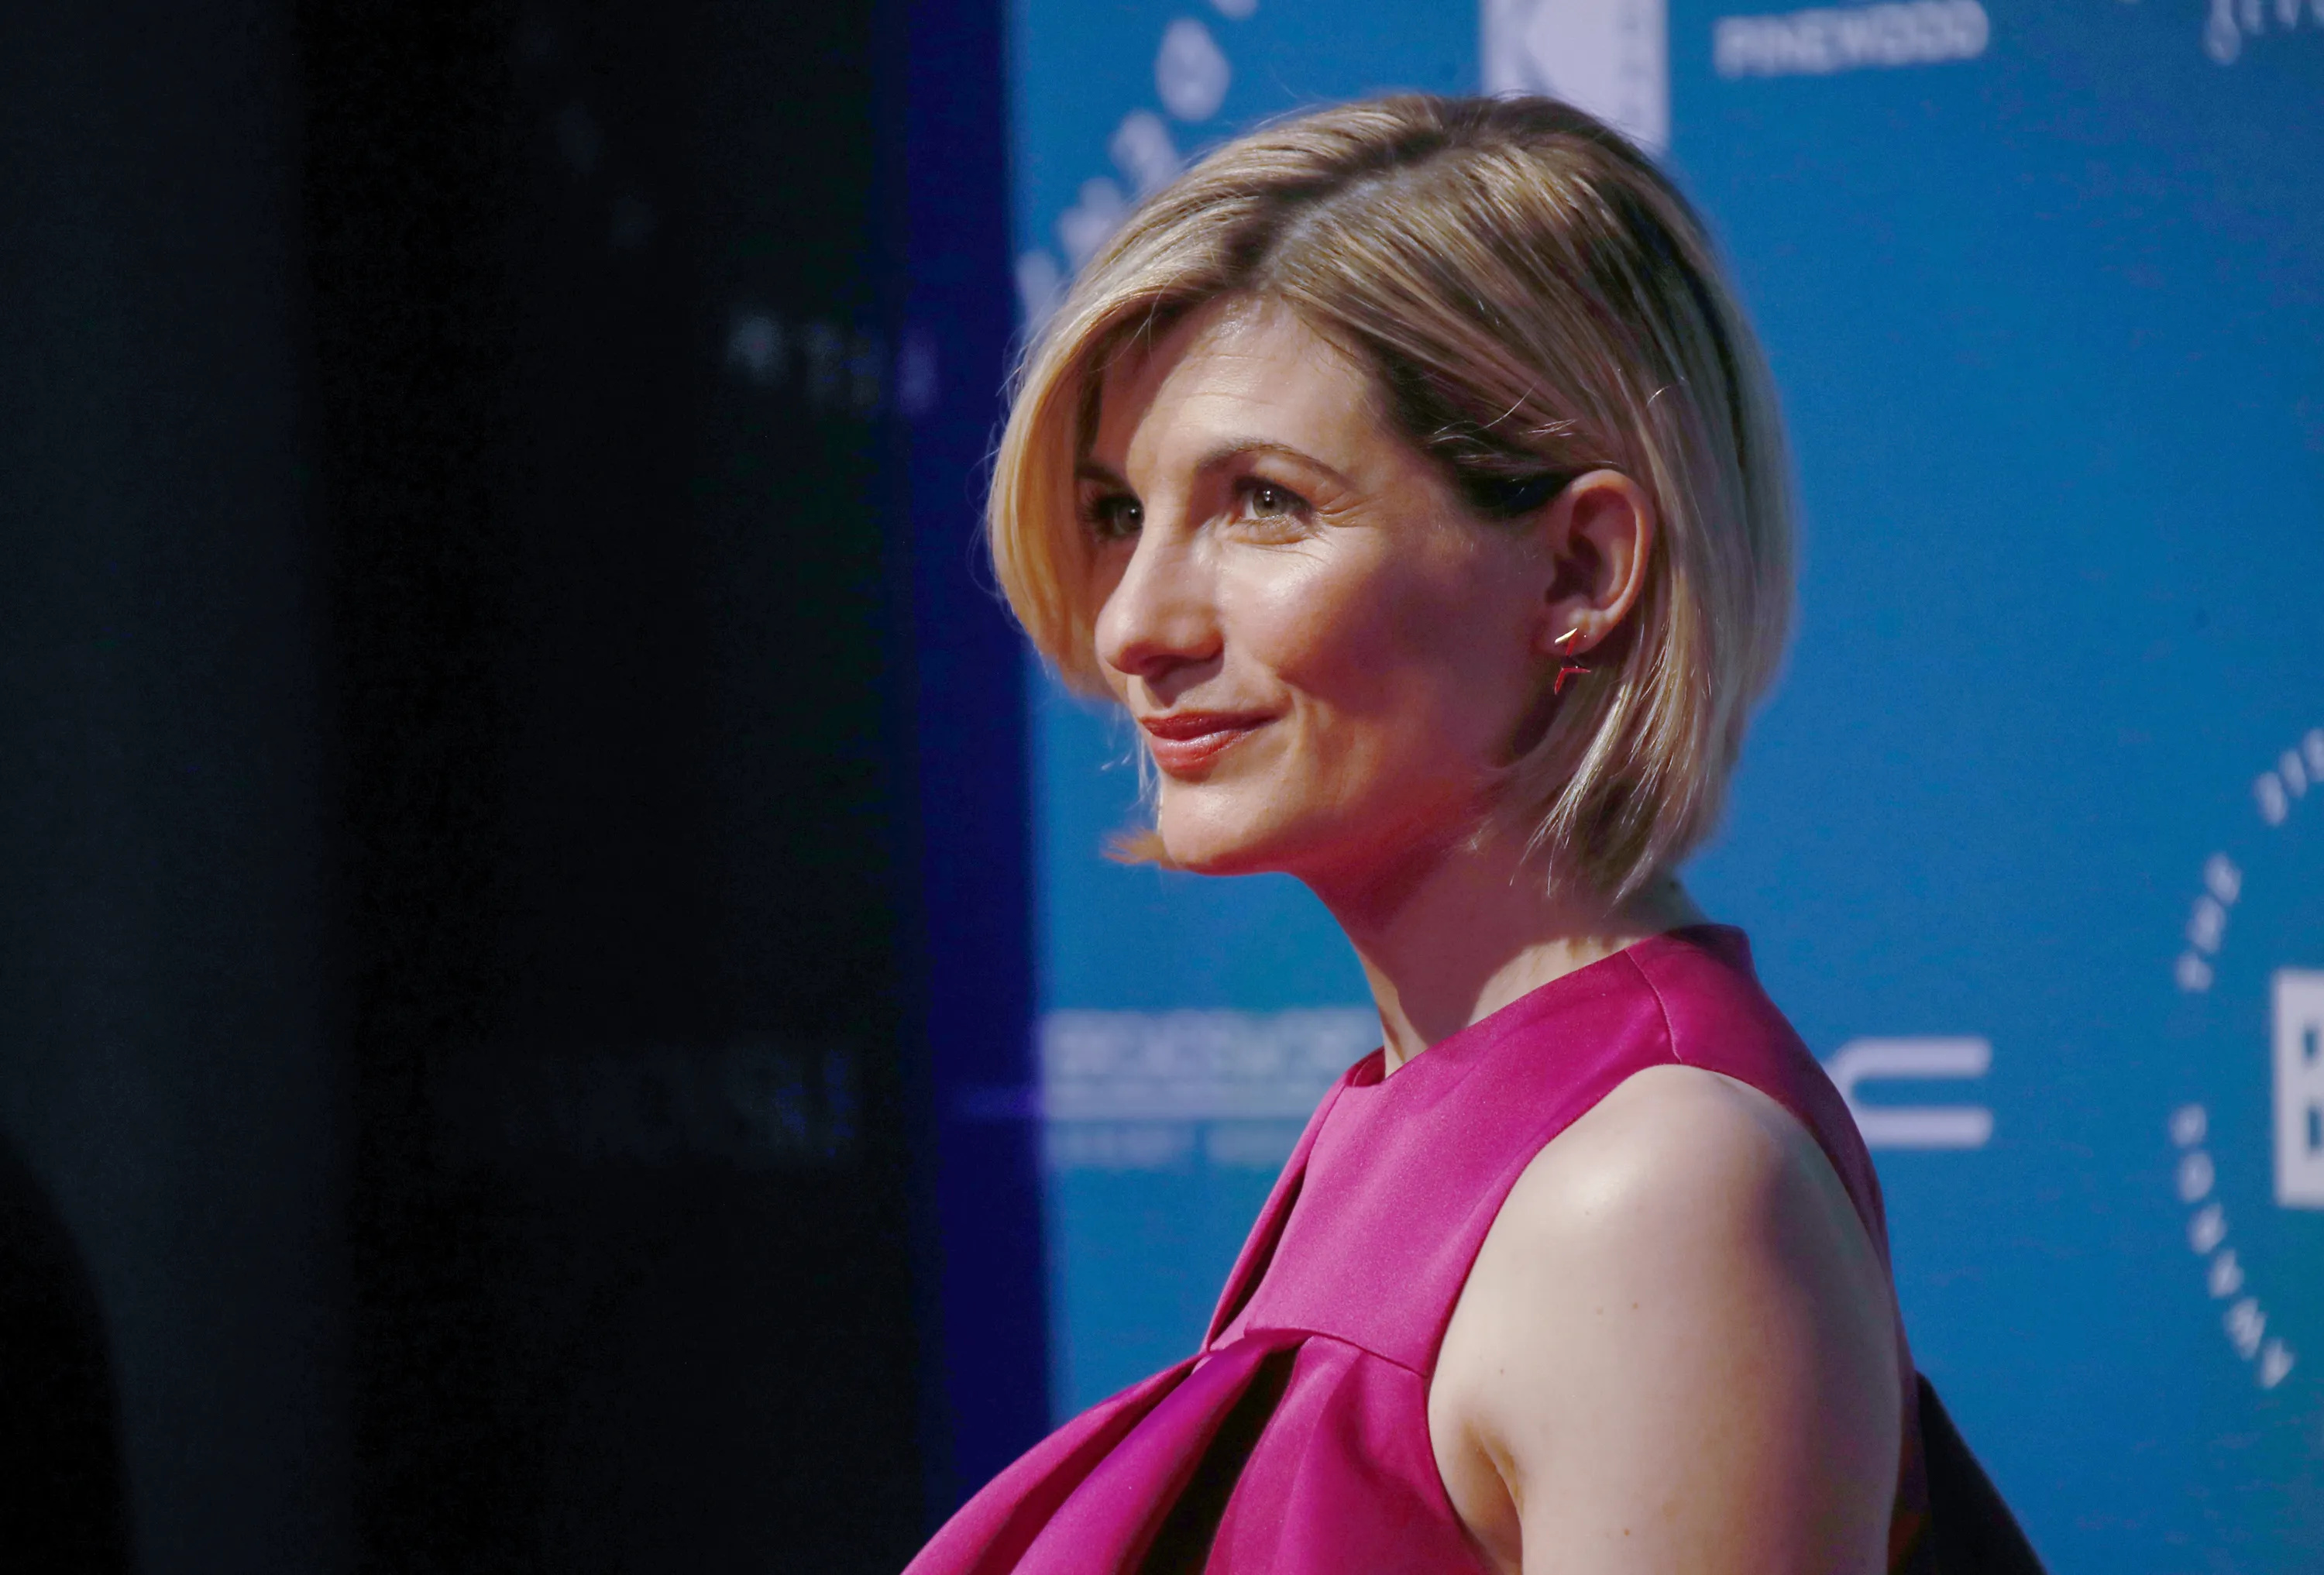 Jodie Whittaker, Told to have fillers, Lip waxed, 3000x2040 HD Desktop